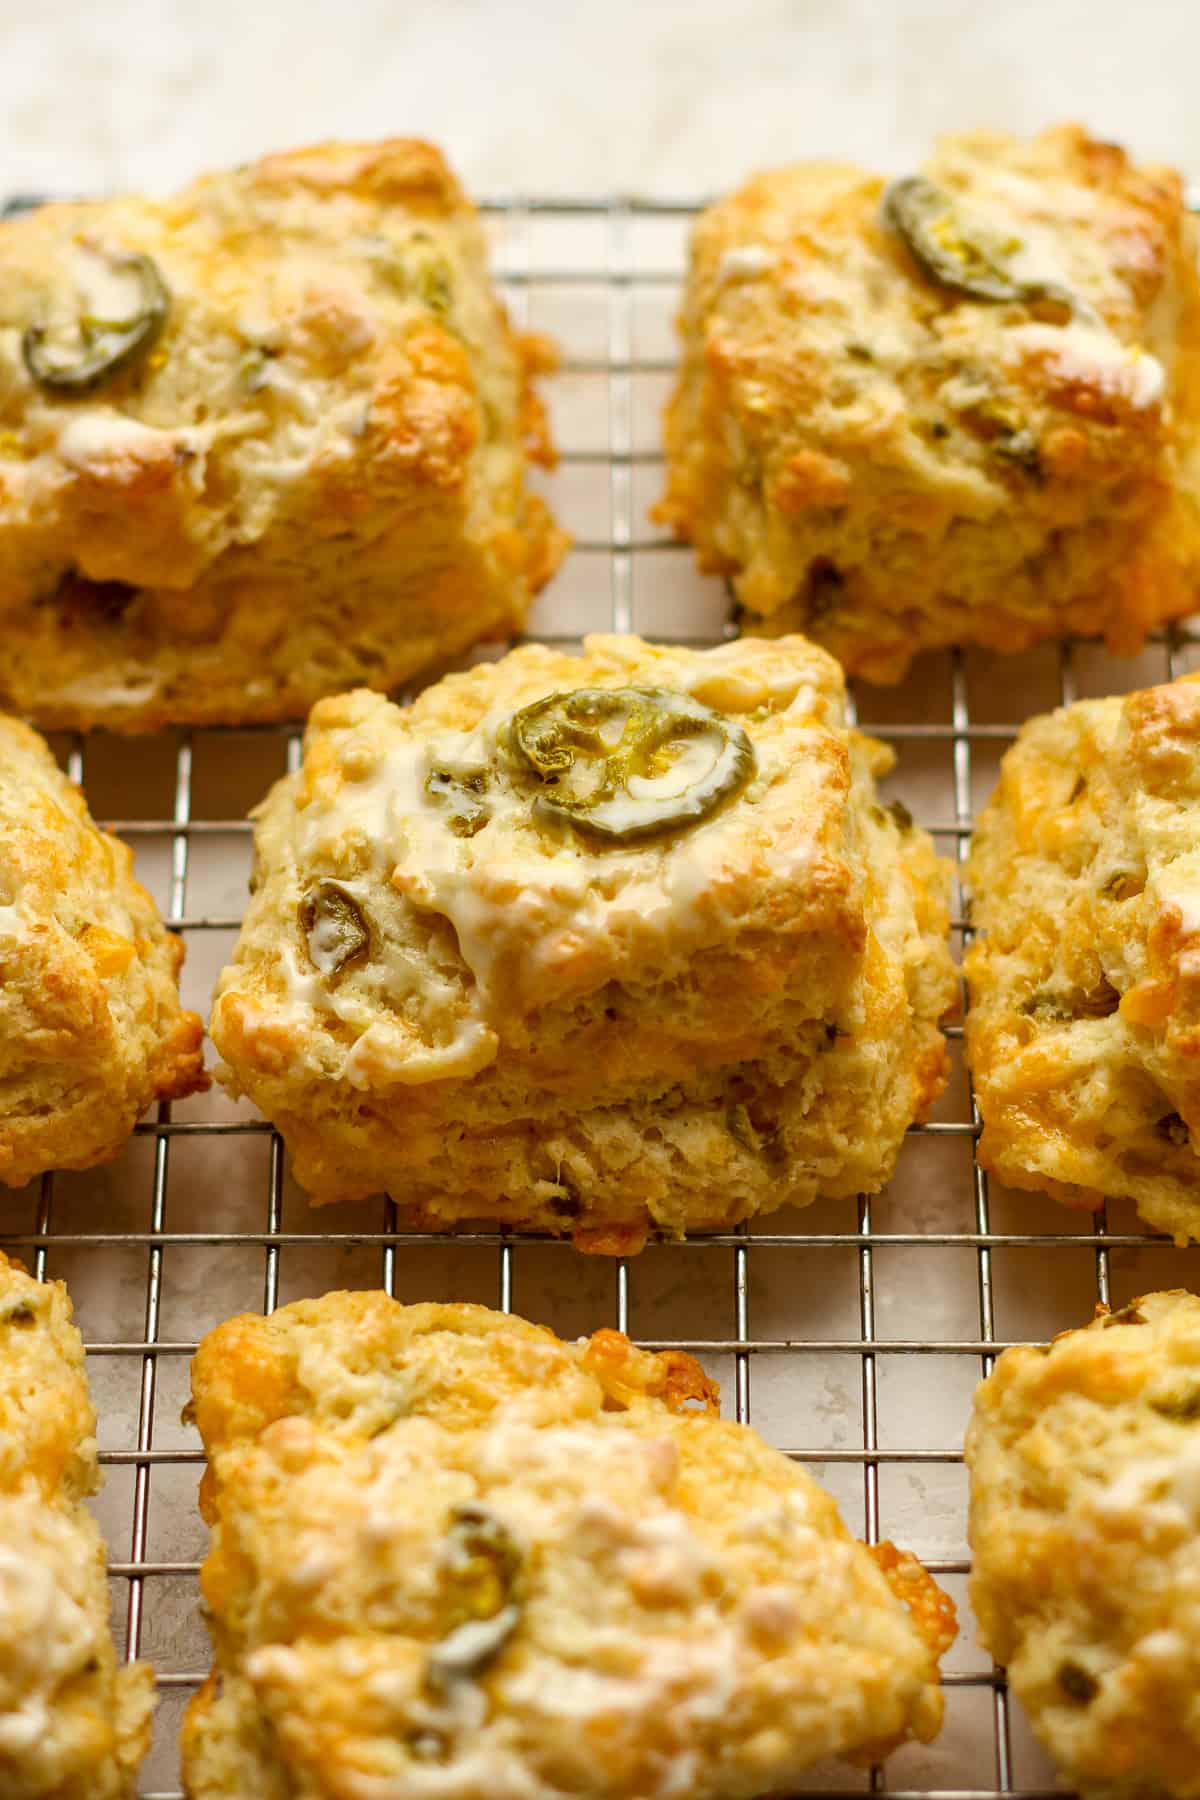 Some flaky biscuits with jalapeño and cheddar.